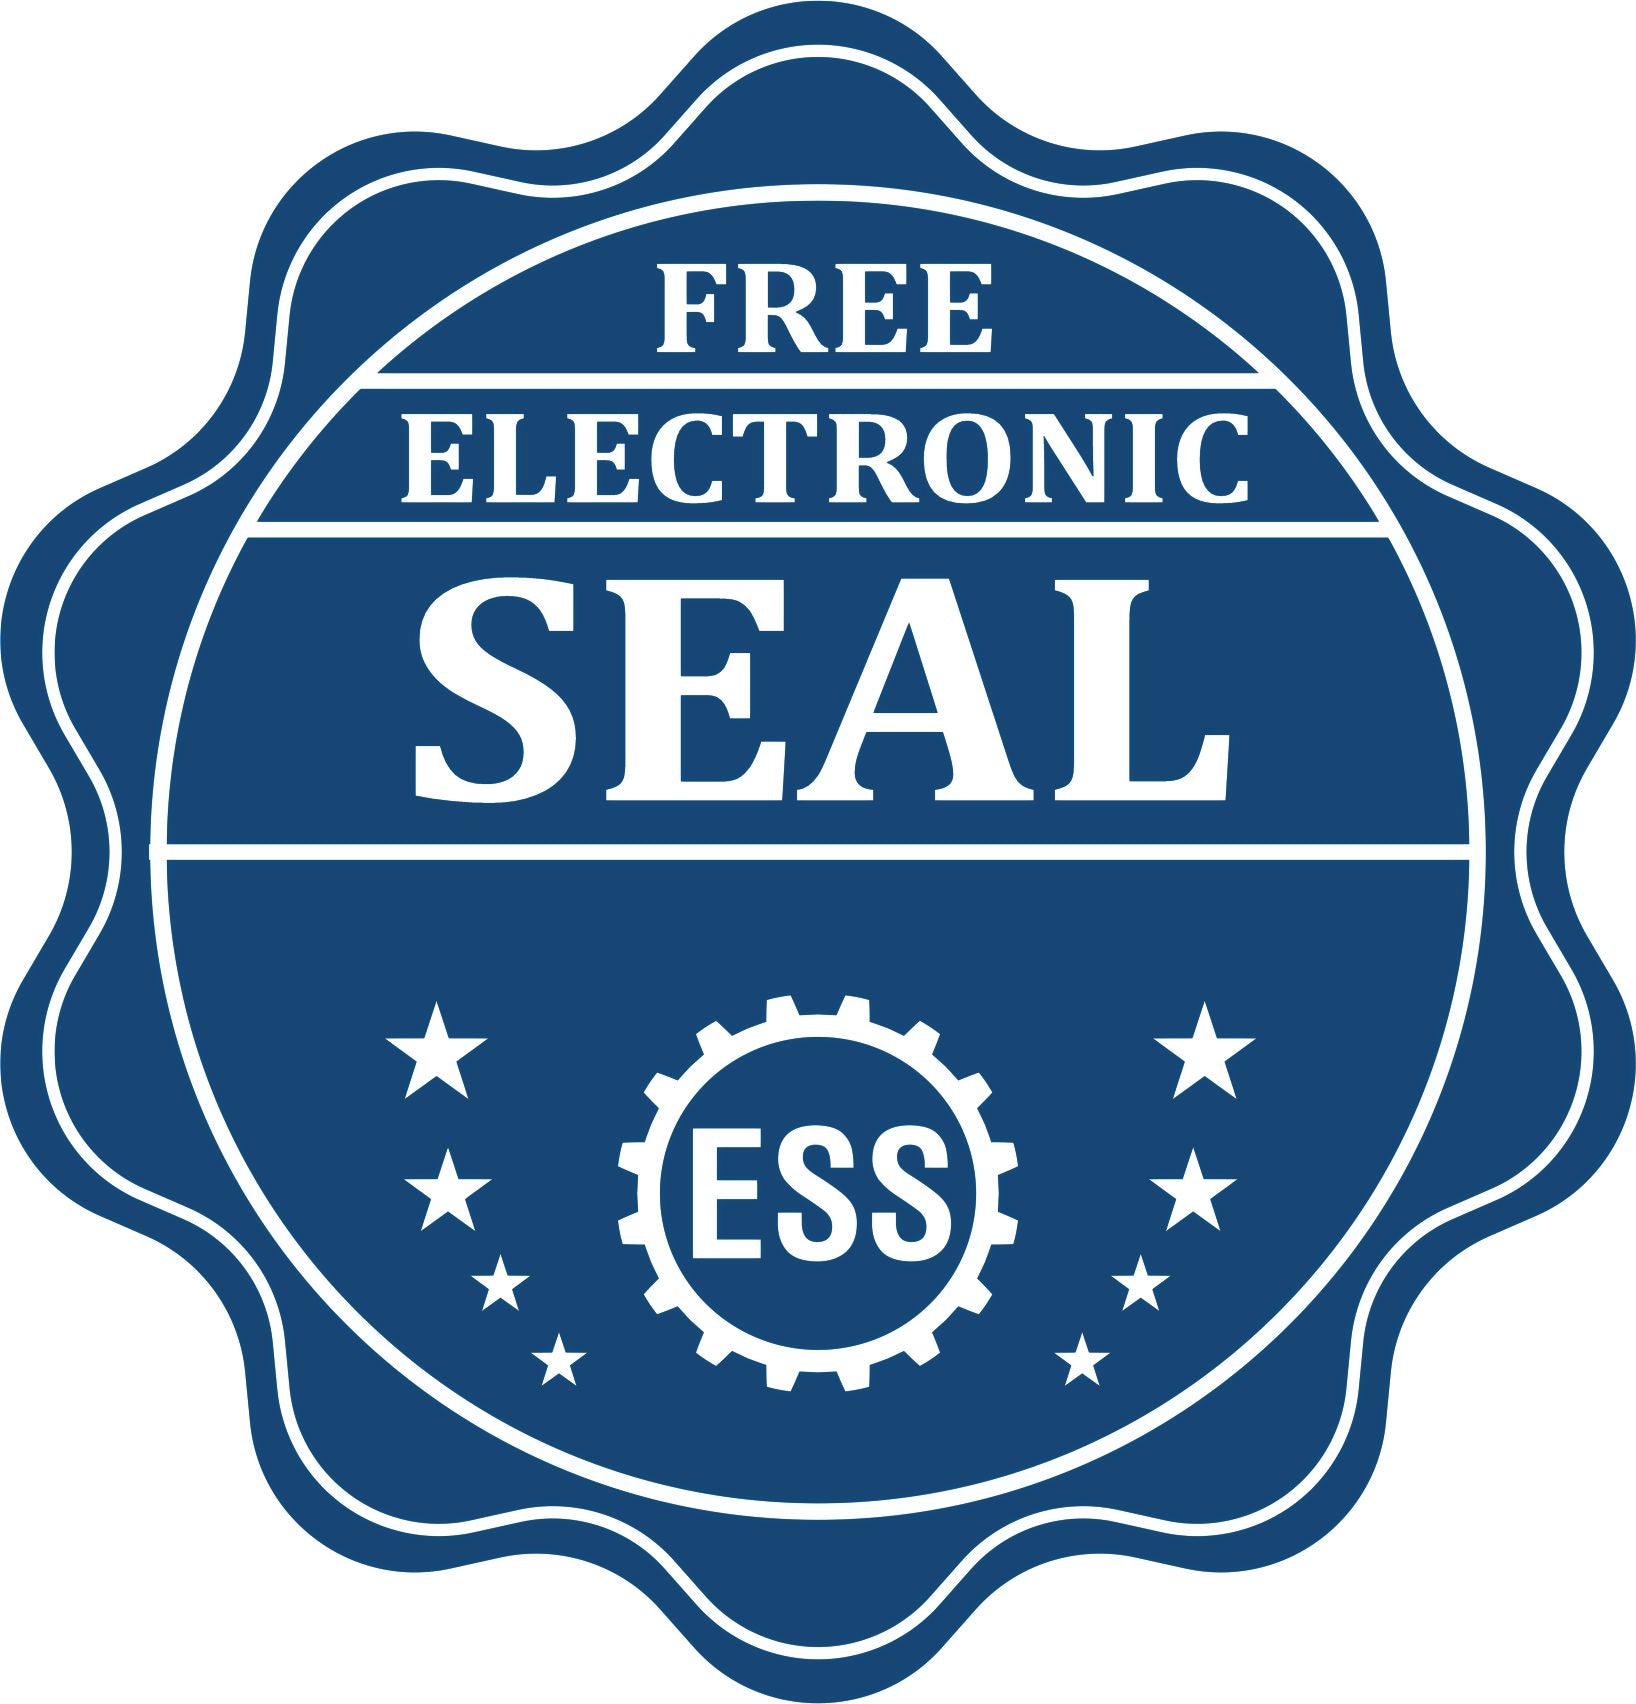 A badge showing a free electronic seal for the Premium MaxLight Pre-Inked Guam Geology Stamp with stars and the ESS gear on the emblem.